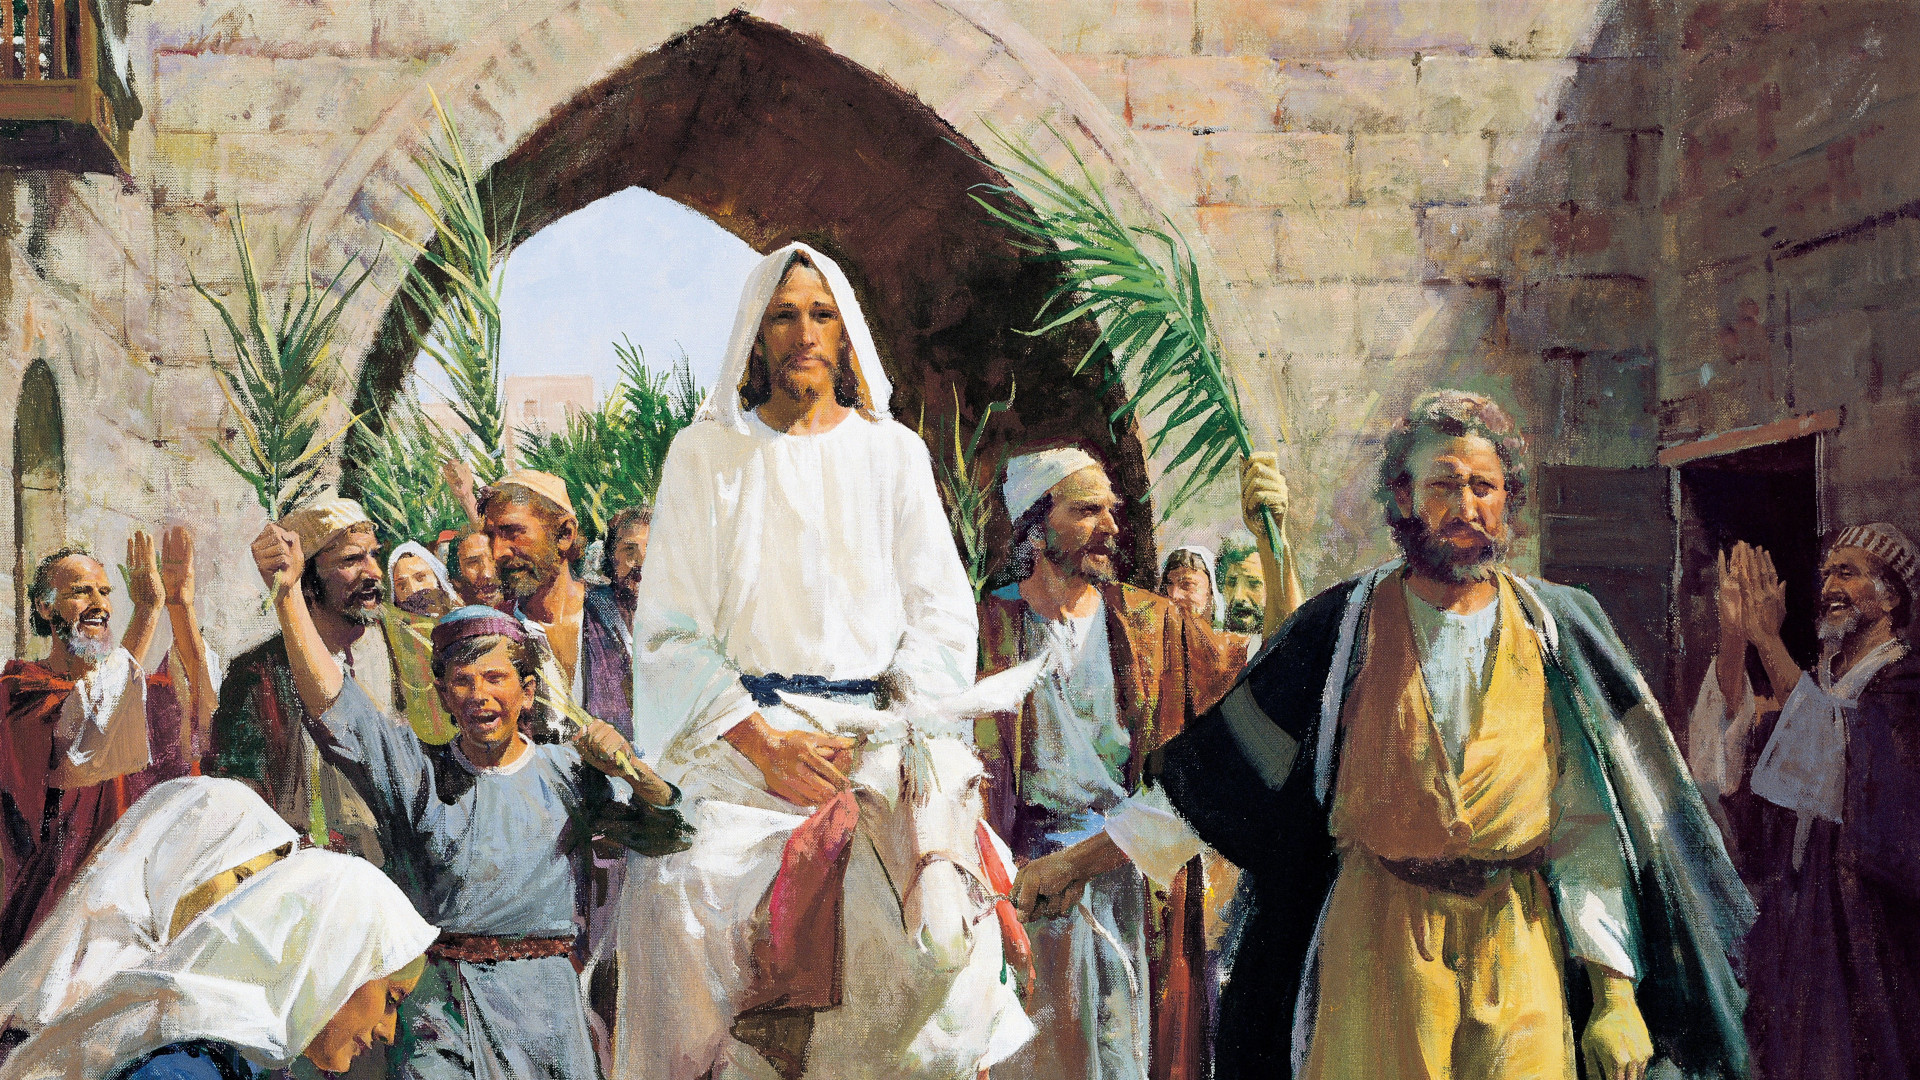 Detail of Triumphal Entry (Christ's Triumphal Entry into Jerusalem) by Harry Anderson